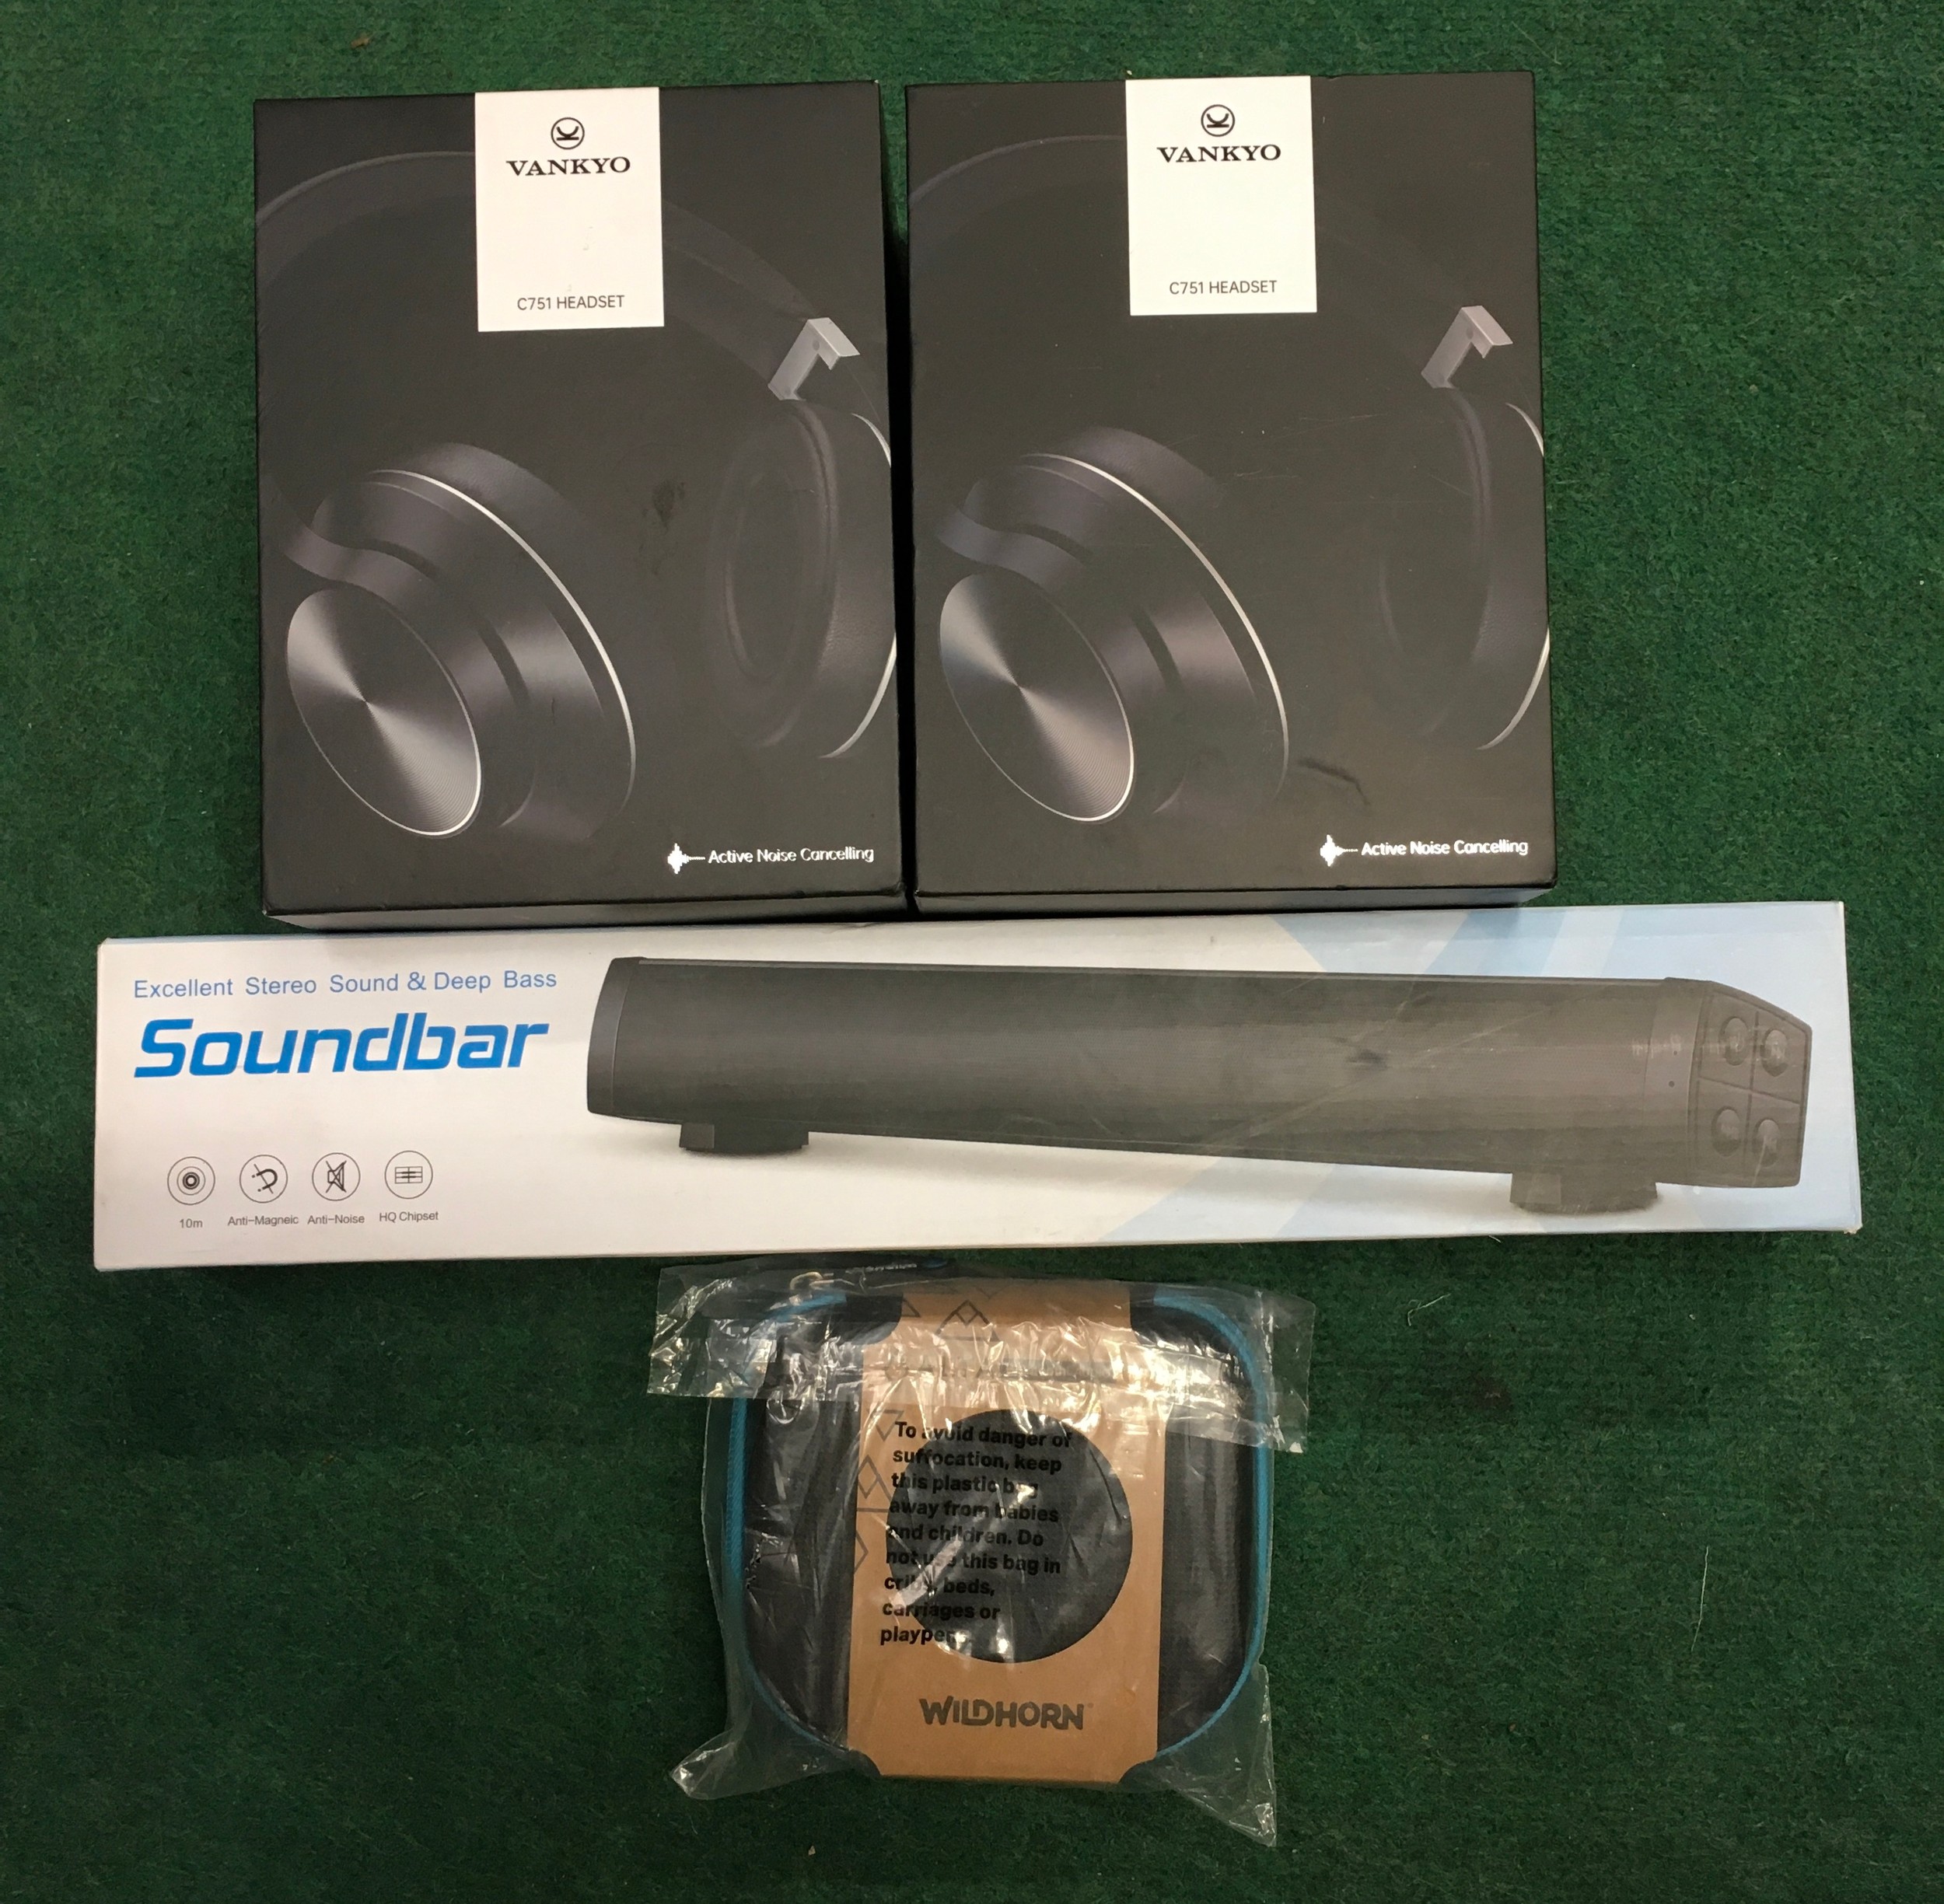 2 x Vankyo boxed headphones together with Bluetooth headphones and a sound bar (not tested).